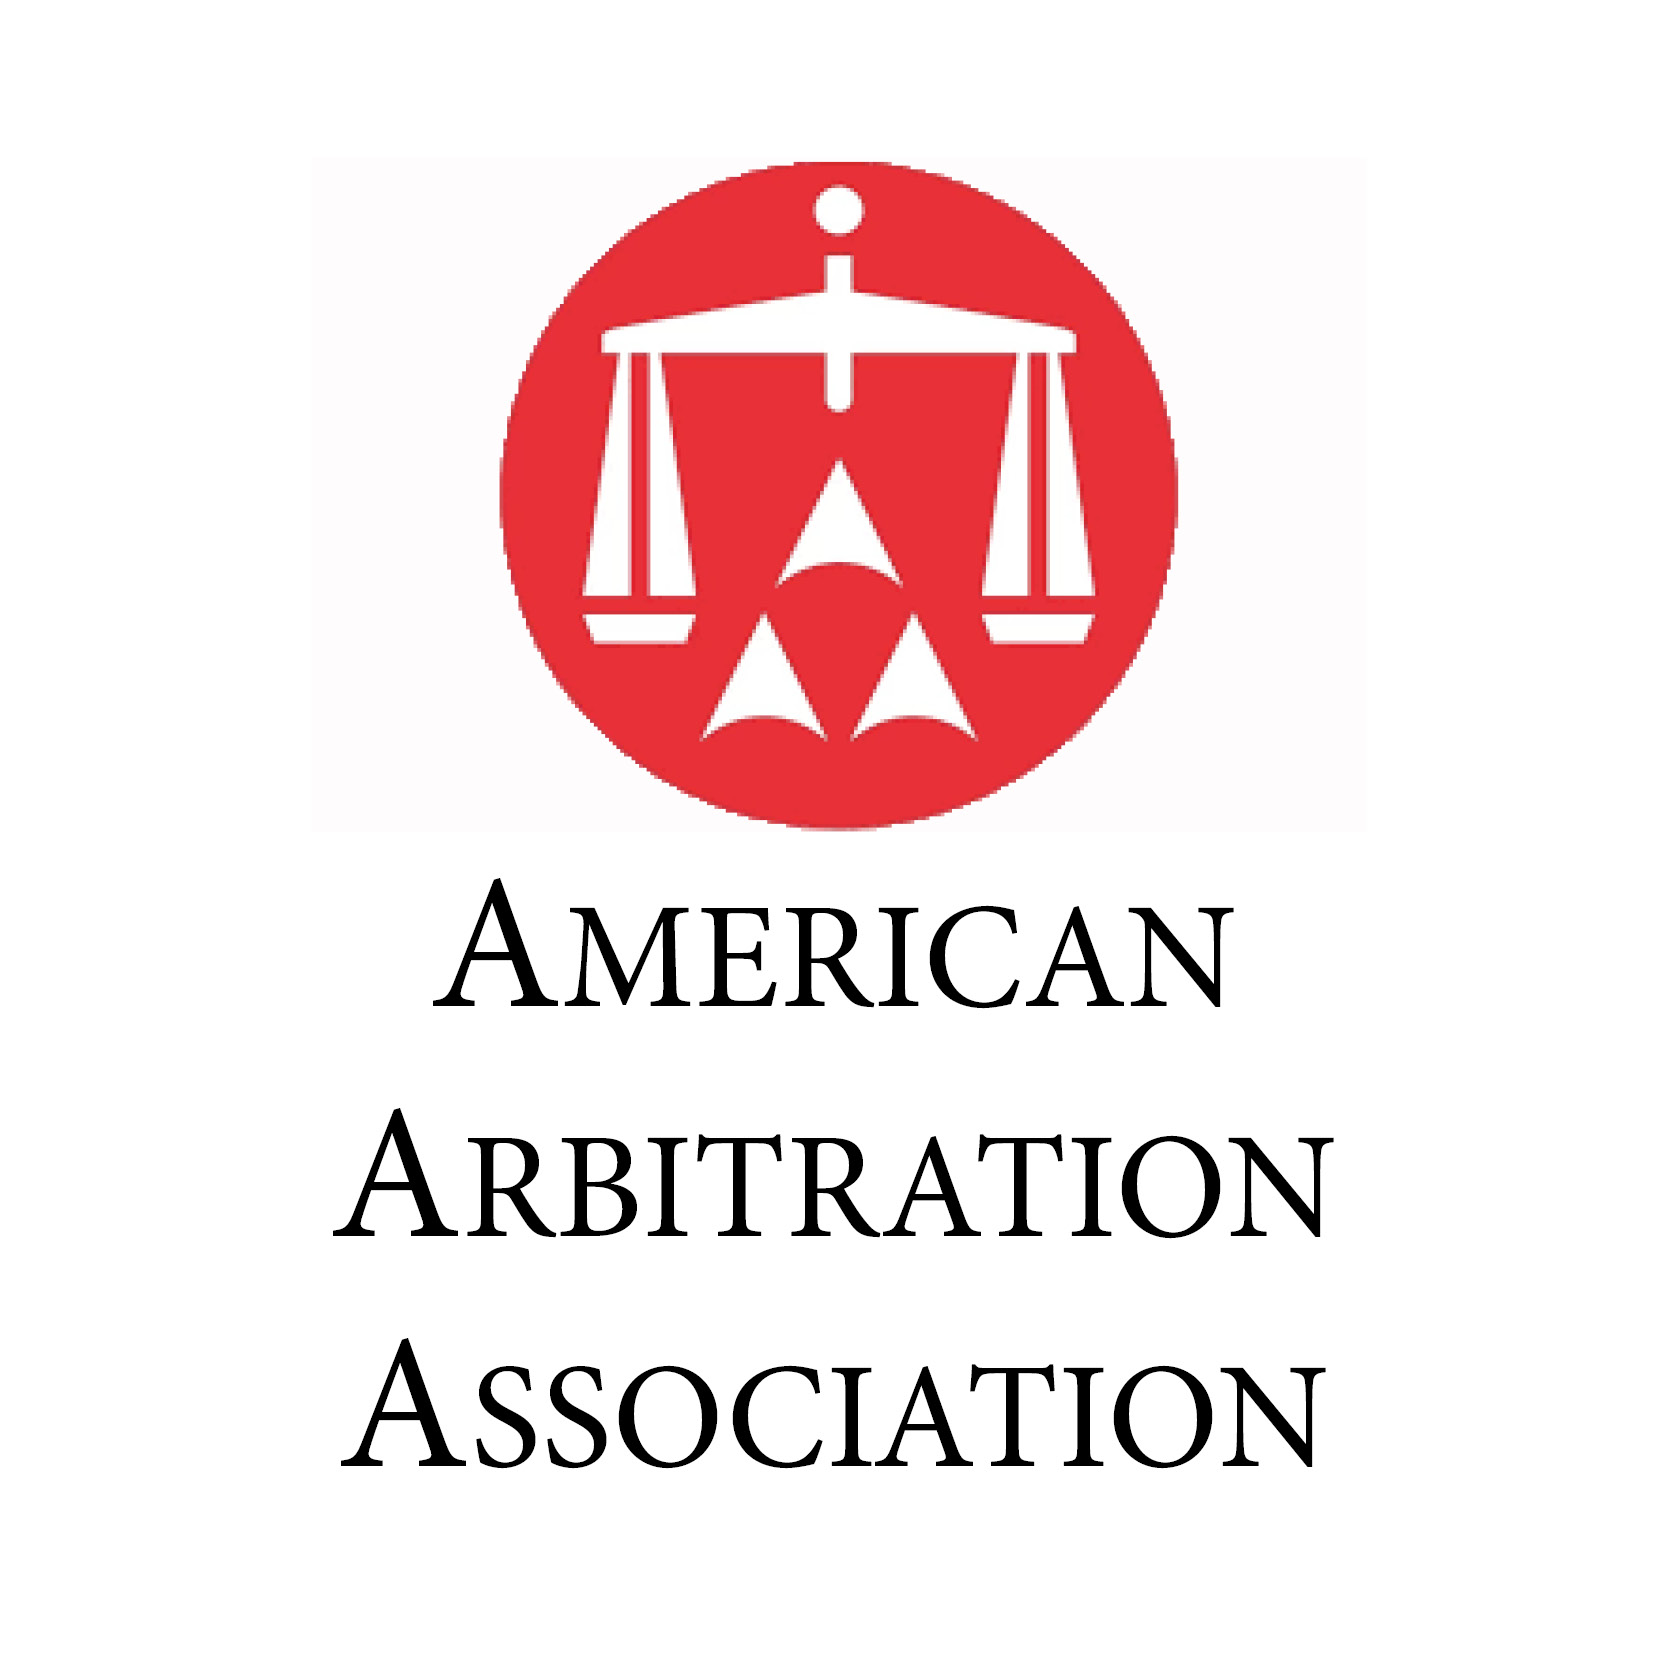 American Arbitration Association logo. They recommend LawsuitAnalysis.com for early dispute